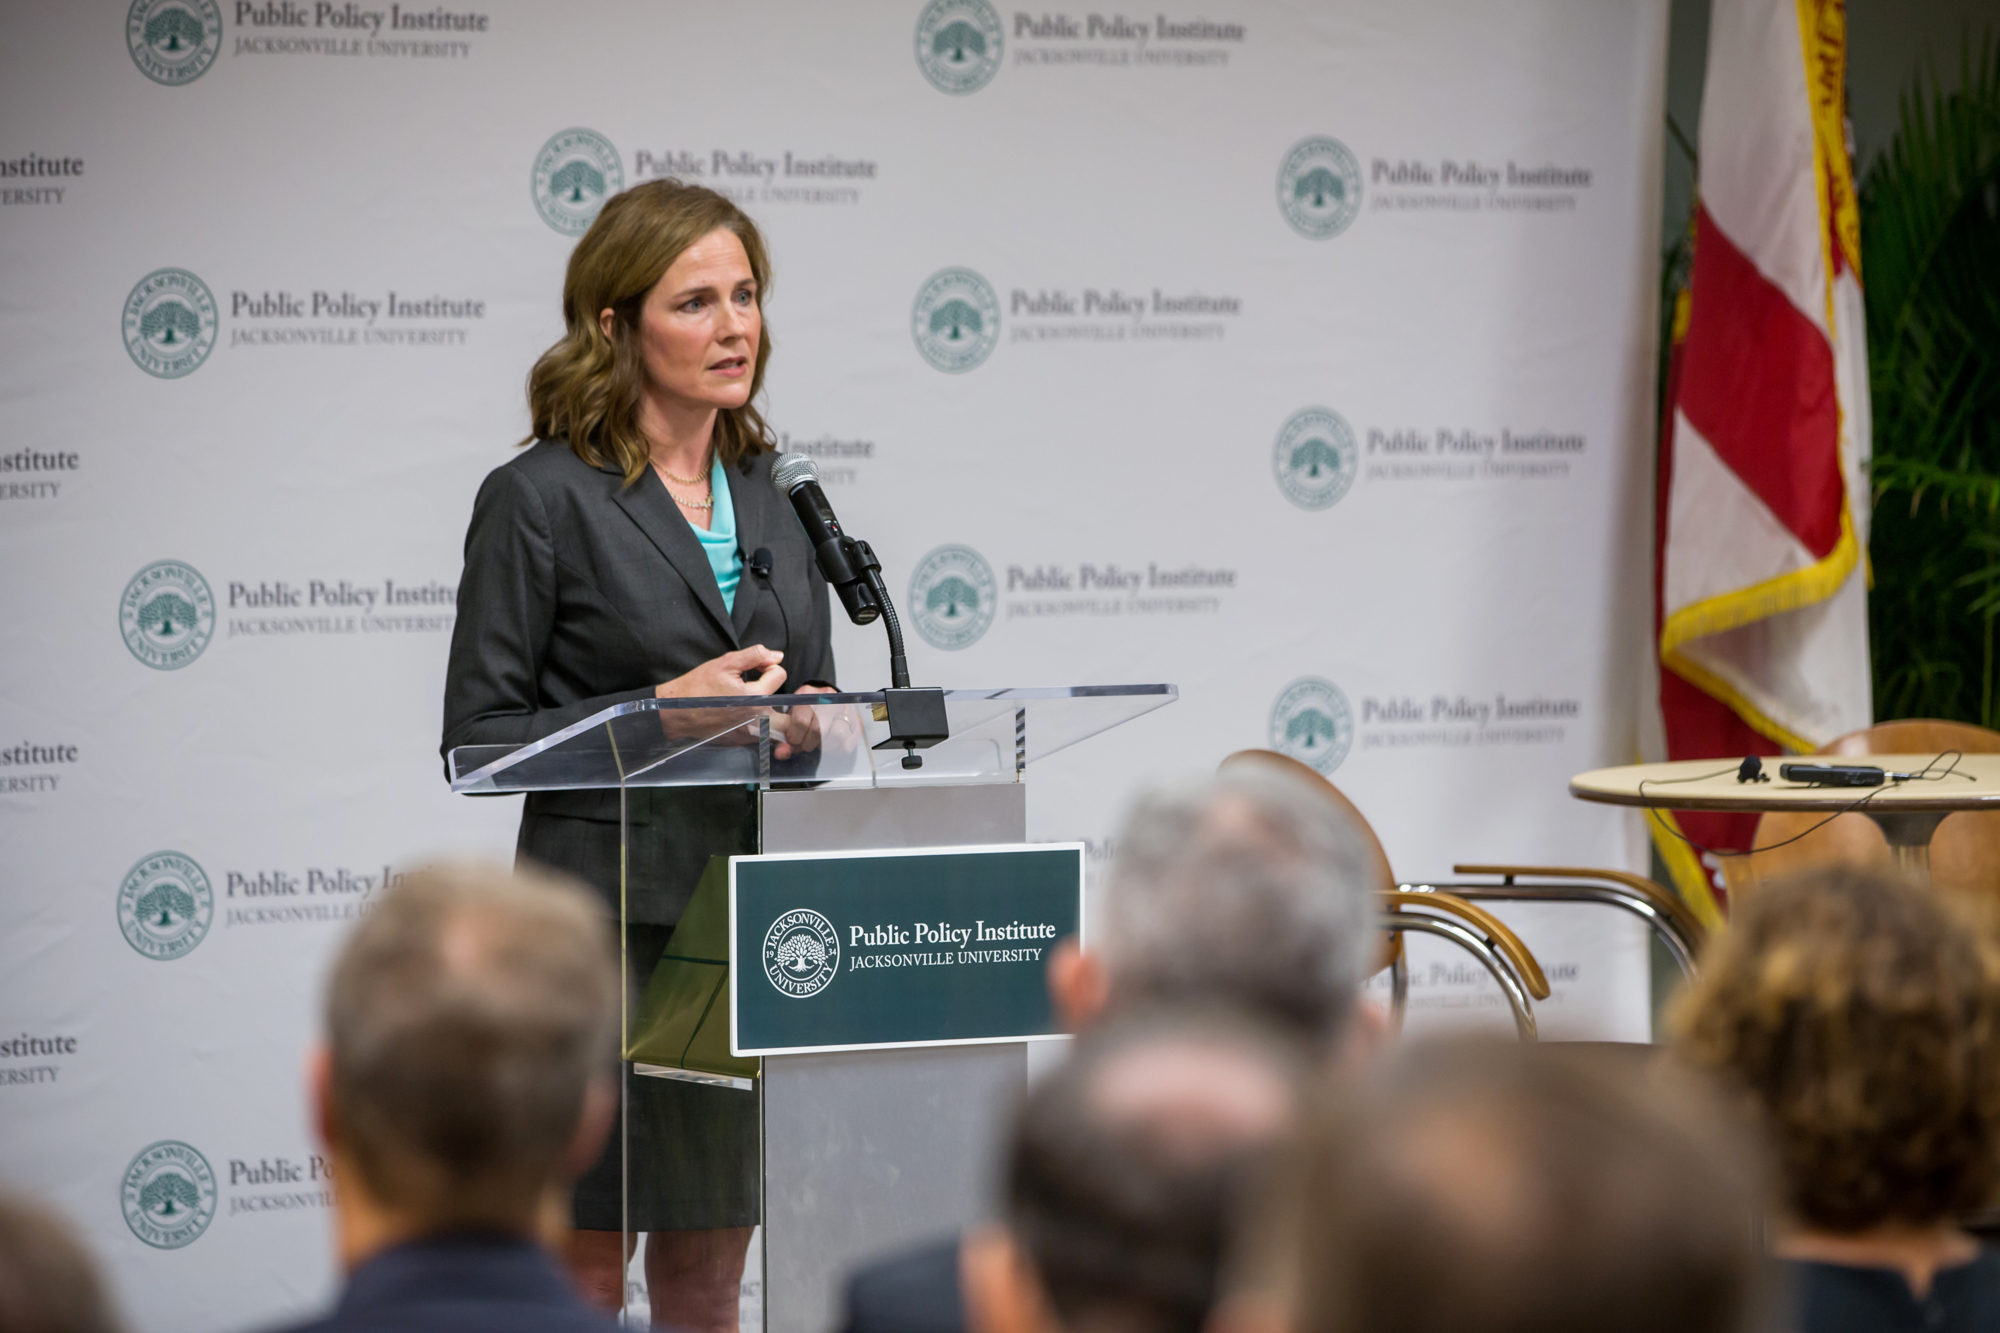 Judge Amy Coney Barrett was the guest speaker when the Notre Dame Alumni Club met in November 2016 at the JU Public Policy Institute.